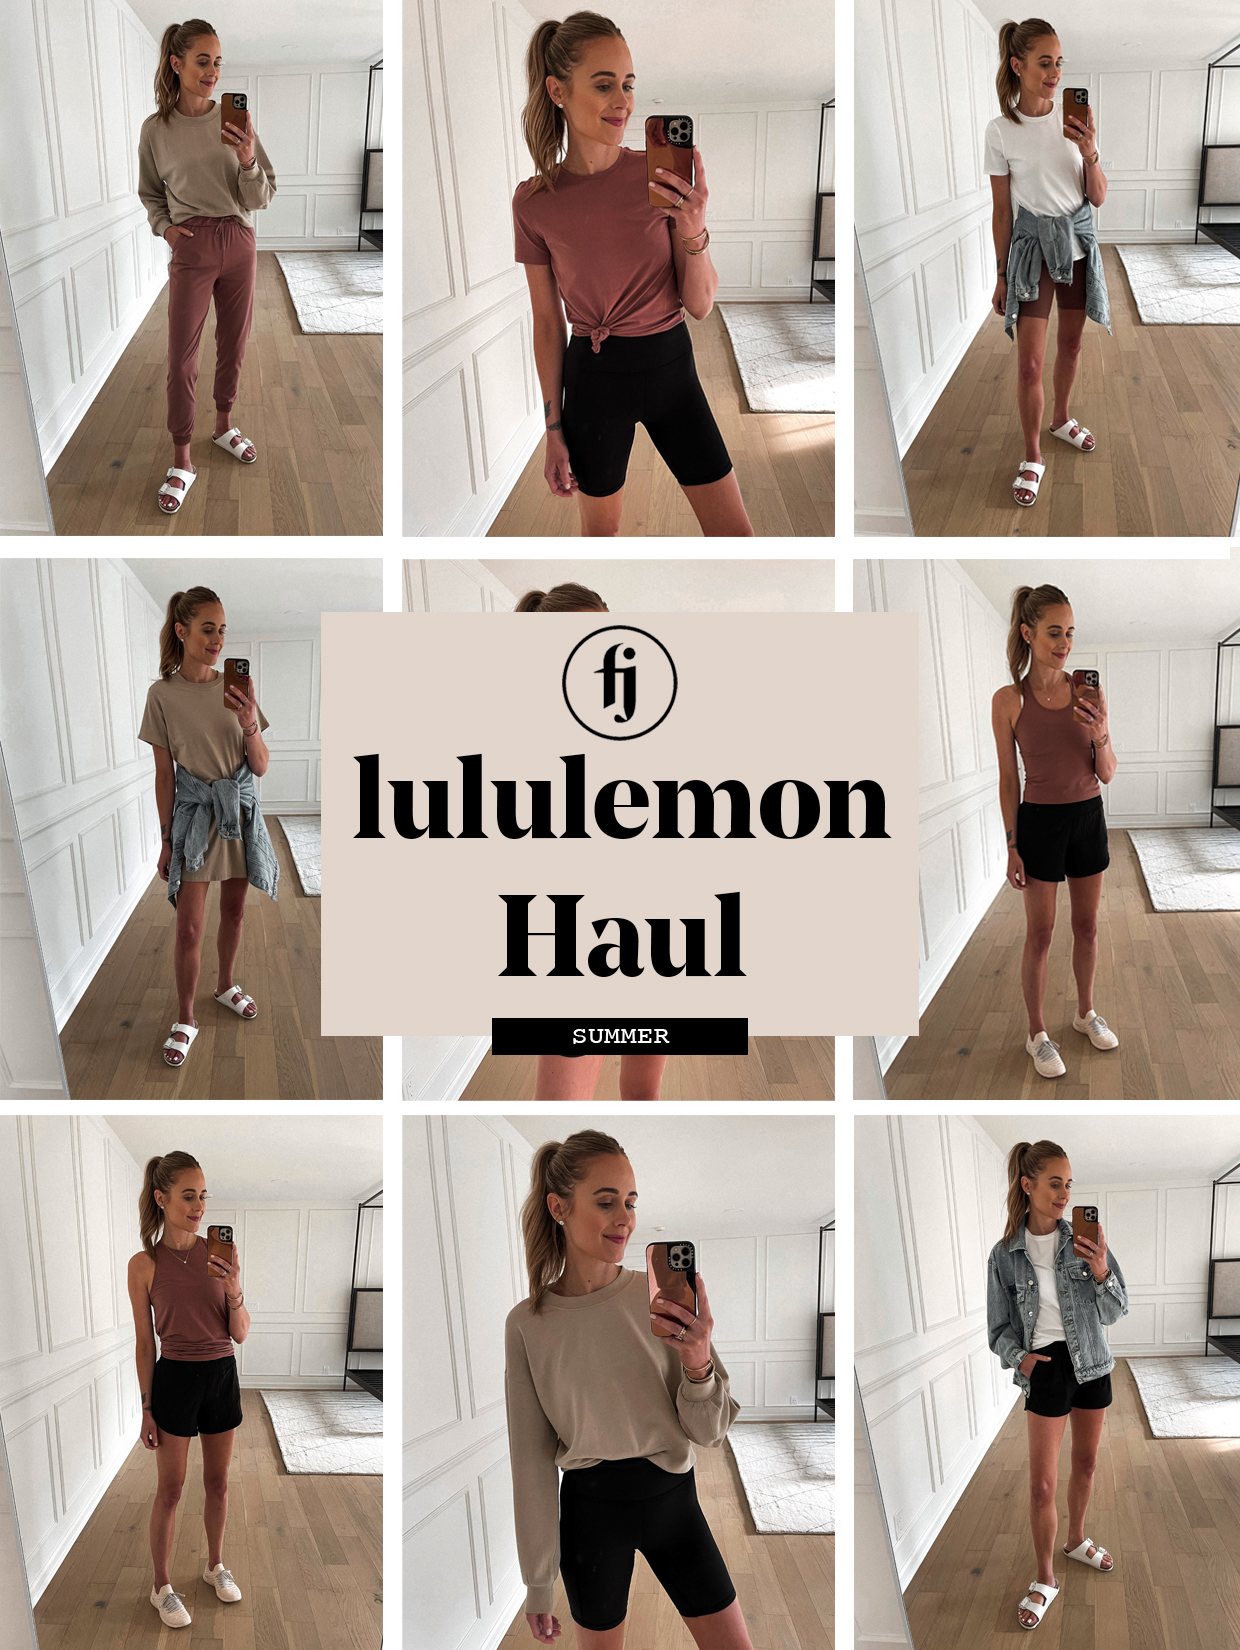 LULULEMON FALL OUTFIT INSPIRATION  Lululemon Educator Outfits & Look-book  2022 